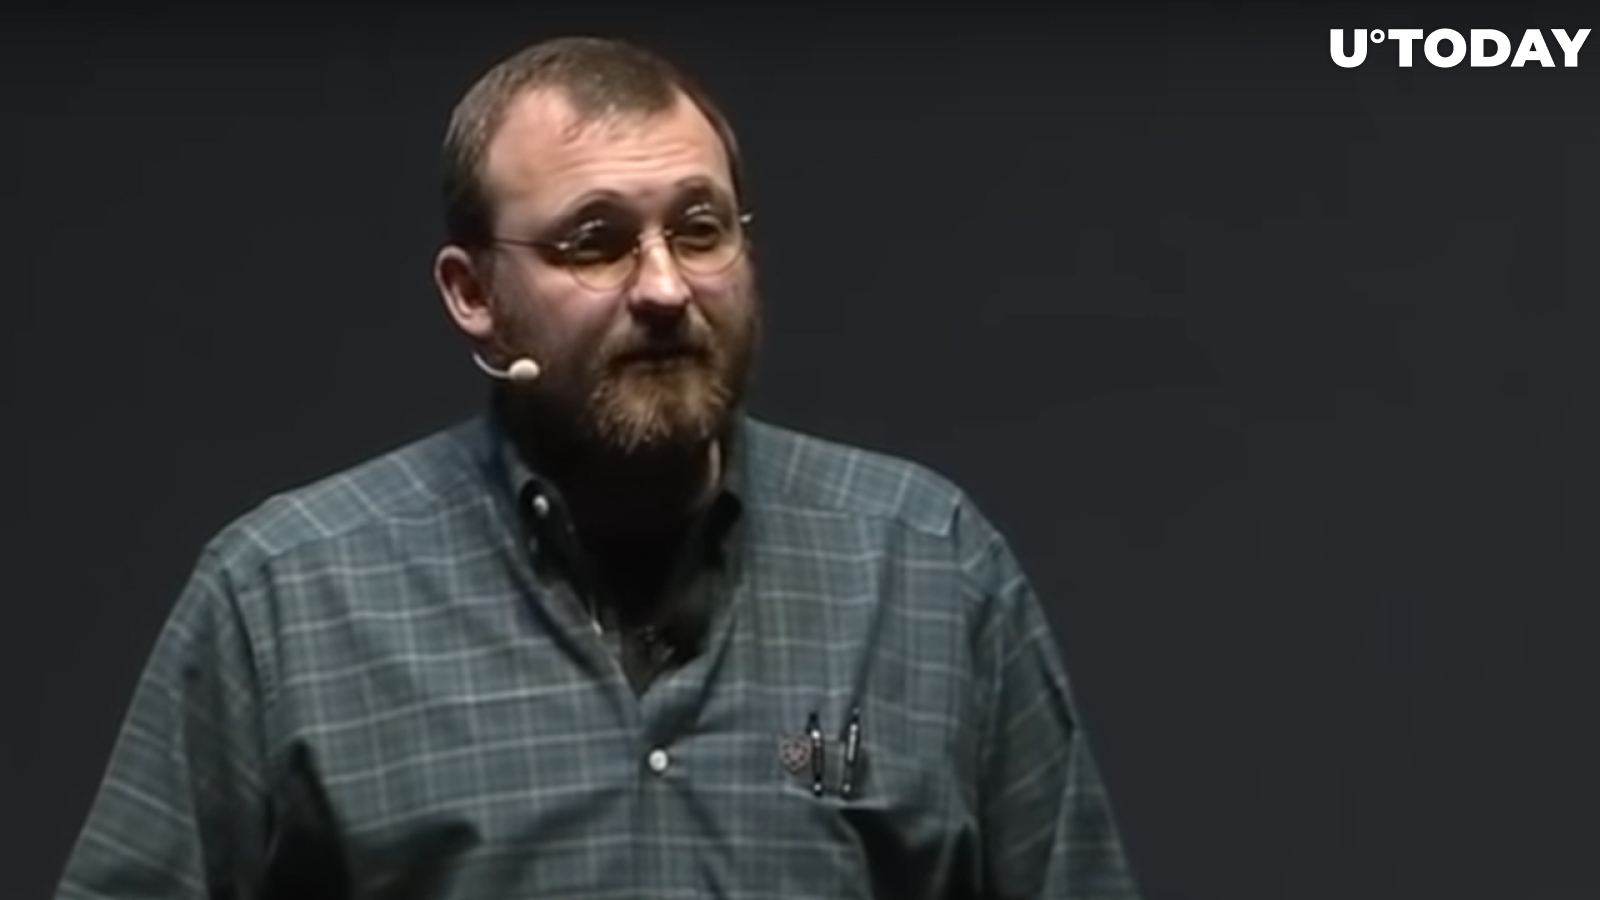 Charles Hoskinson Discloses Key Elements of Cardano's Ecosystem Growth